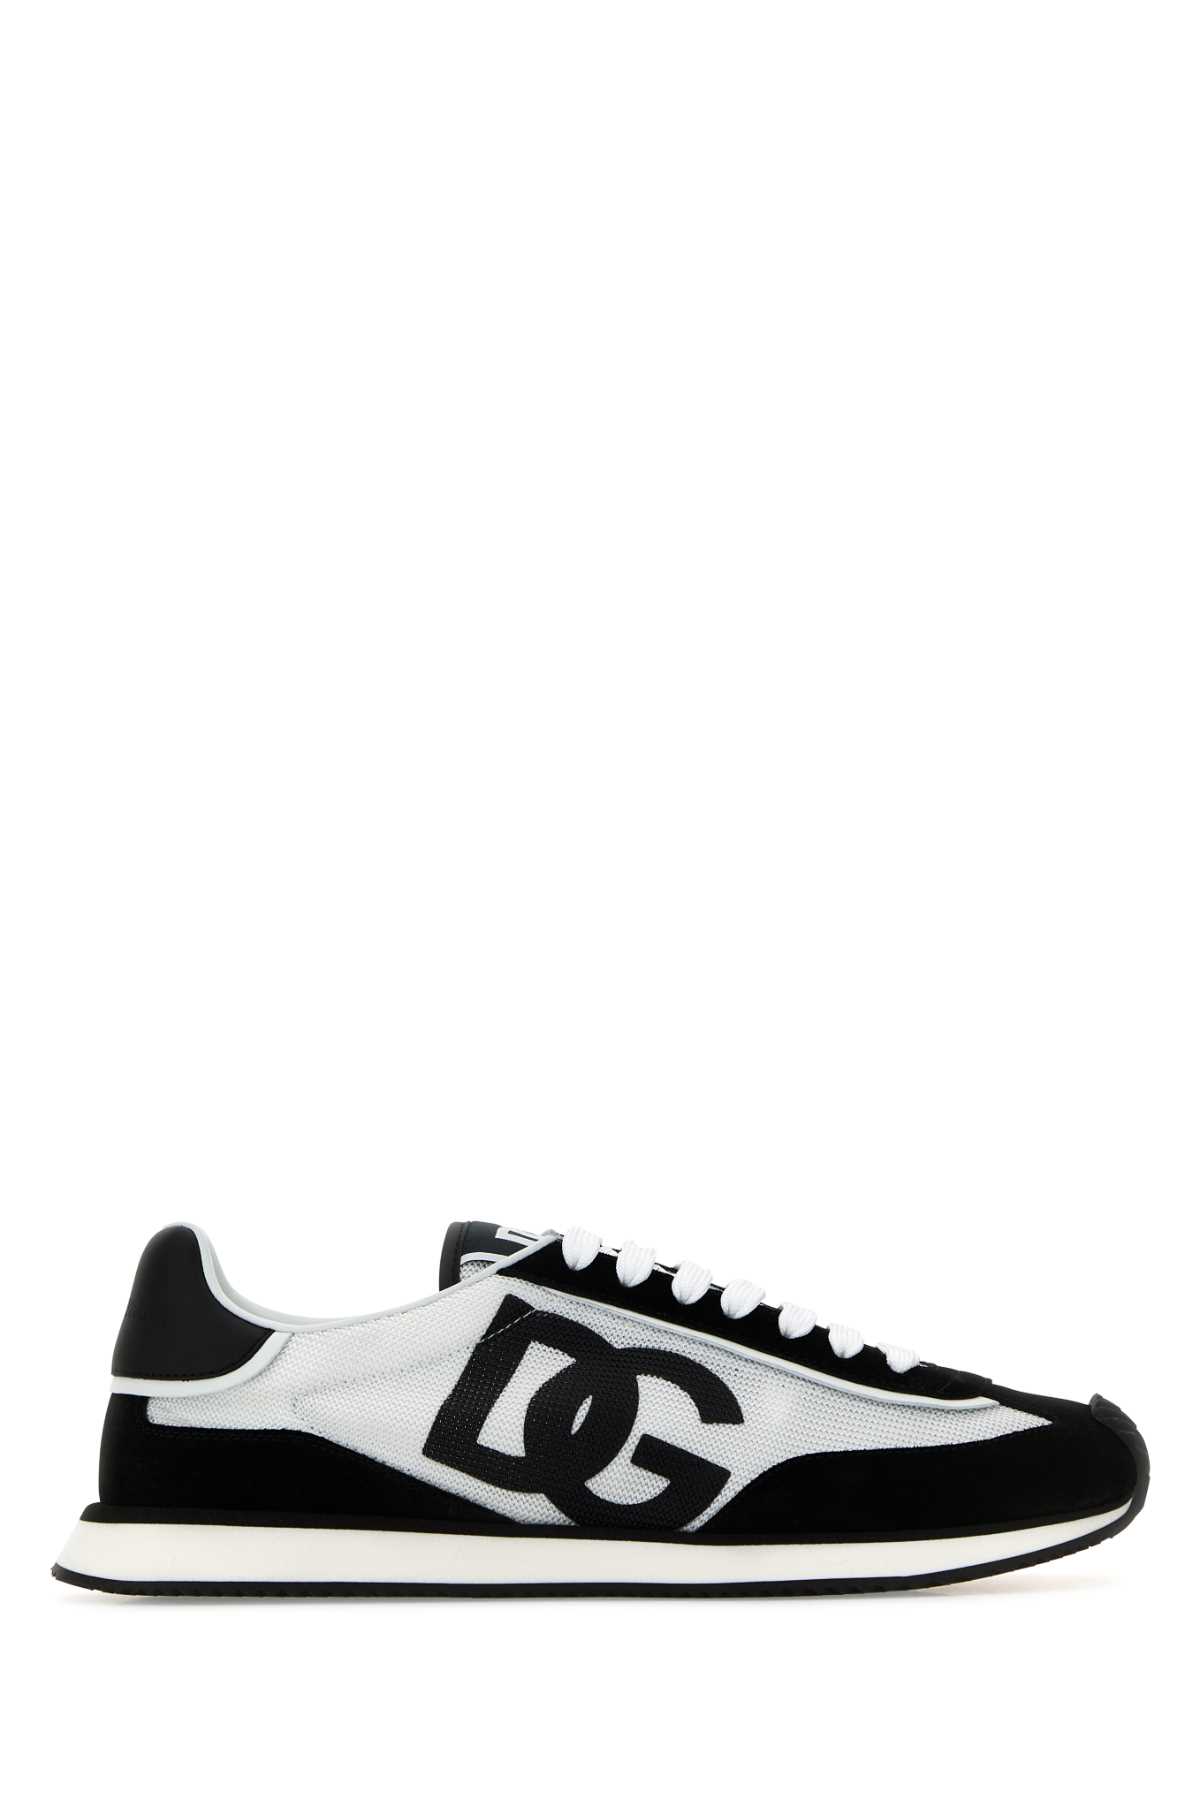 Dolce & Gabbana Two-tone Mesh And Suede Dg Aria Sneakers In Whiteblack